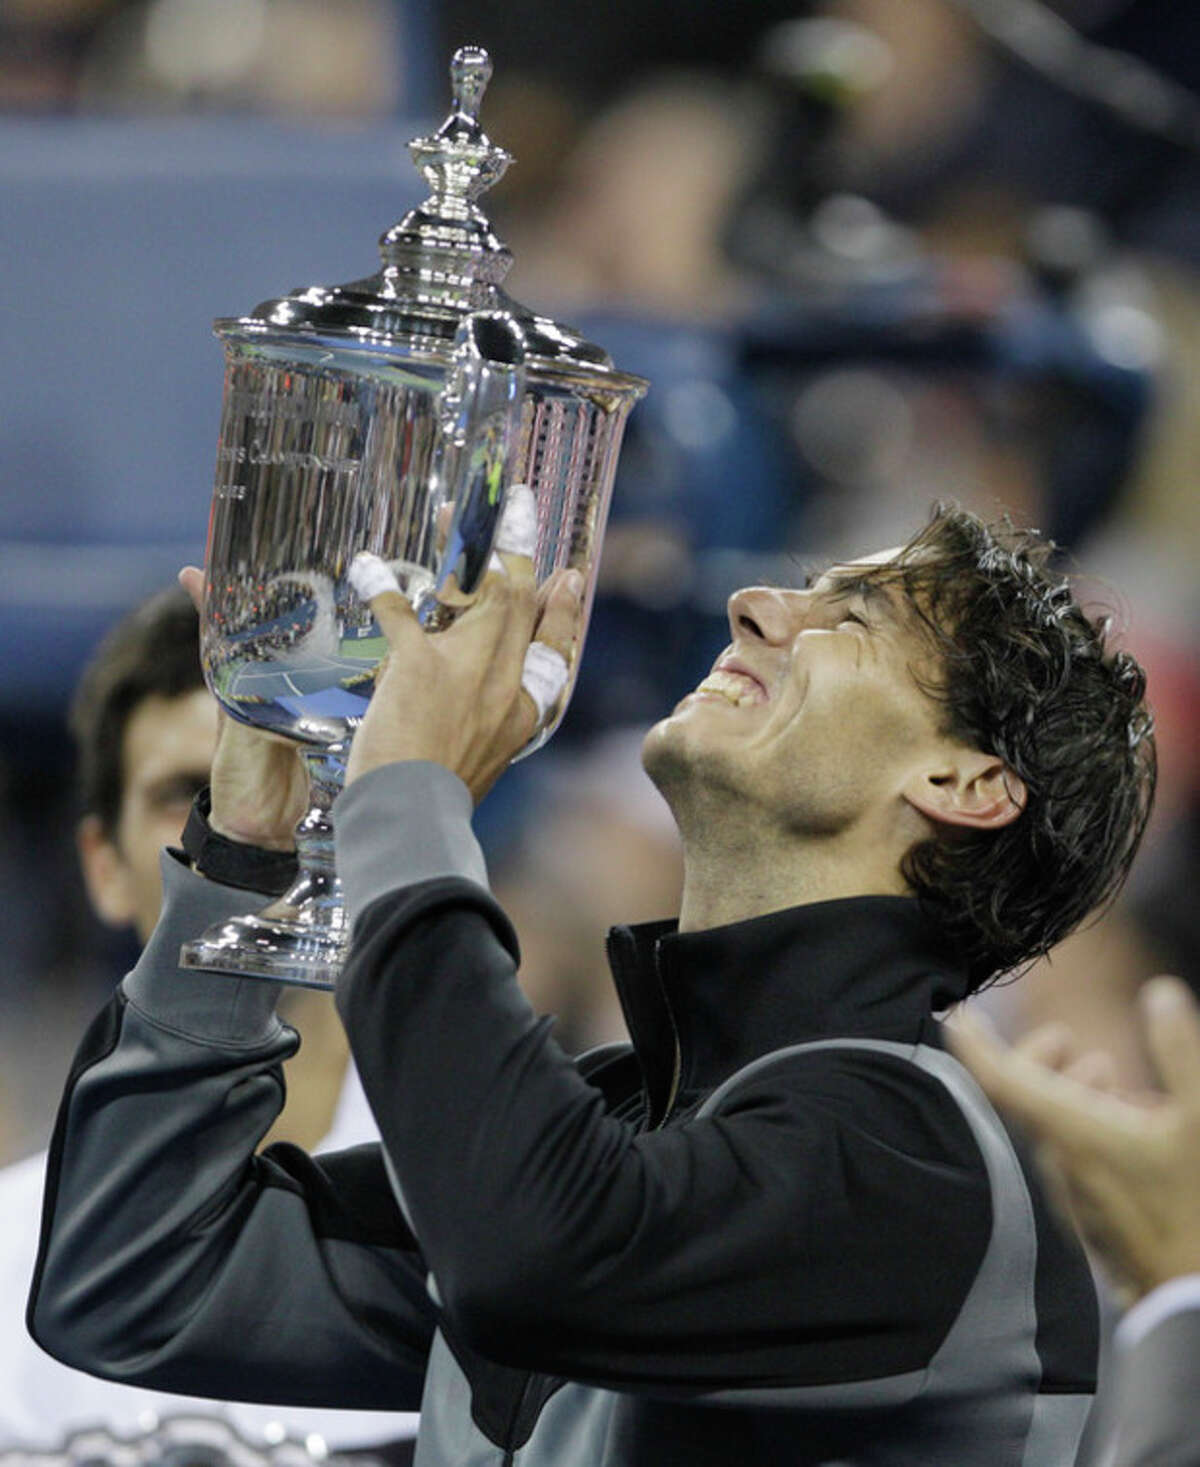 FILE - This Sept. 13, 2010 file photo shows Rafael Nadal, of Spain, holding the championship trophy after defeating Novak Djokovic, of Serbia, to win the men's championship match at the U.S. Open tennis tournament in New York. The U.S. Open says that Nadal has withdrawn from the last Grand Slam tennis tournament of the year because of injury. (AP Photo/Charles Krupa, File)